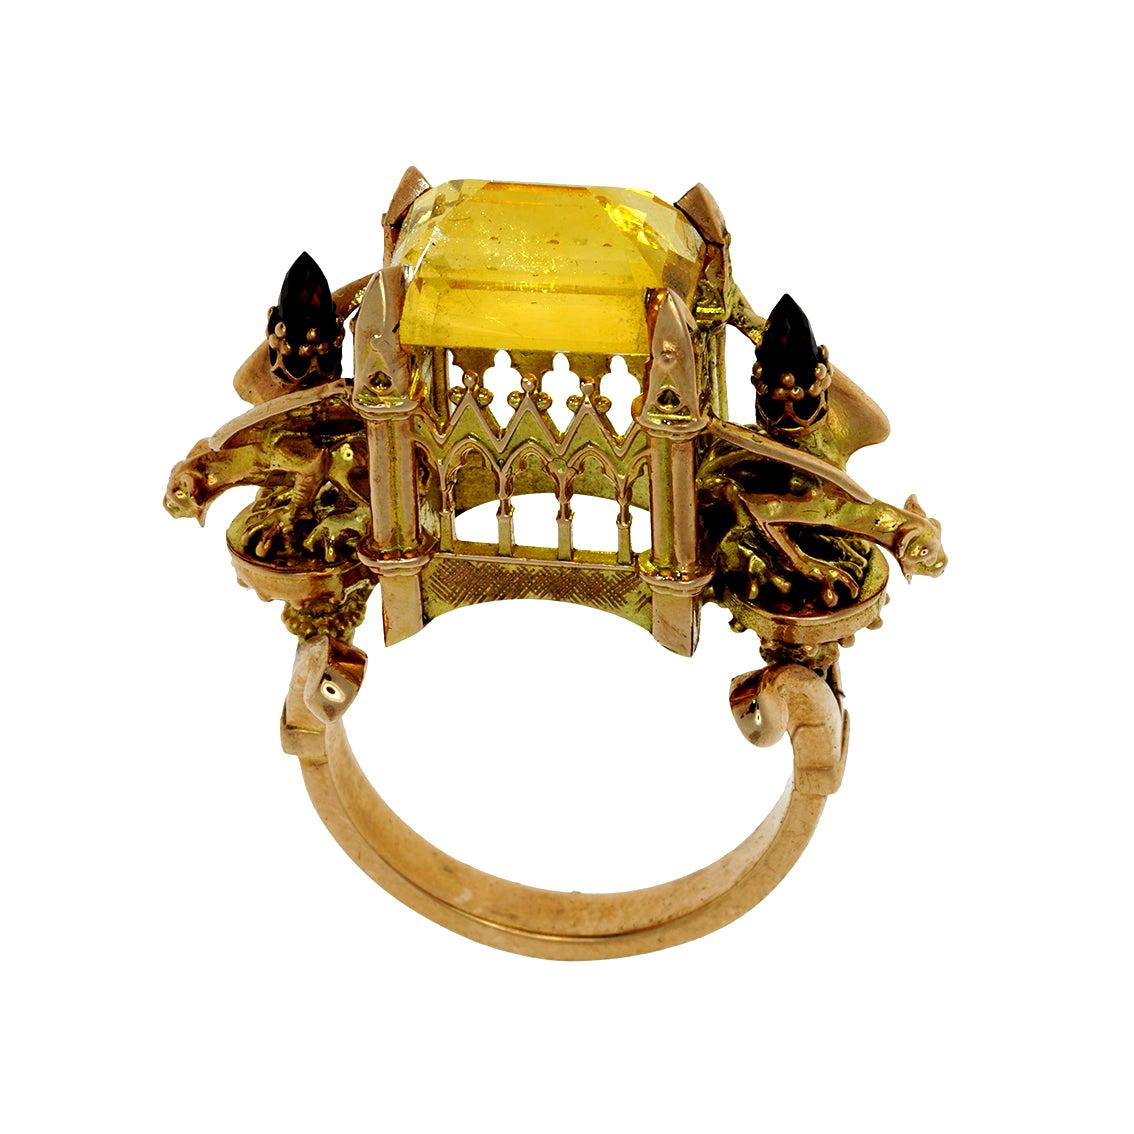 William Llewellyn Griffiths 9 Karat Gold Citrine Euphoric Triumph Cathedral Ring